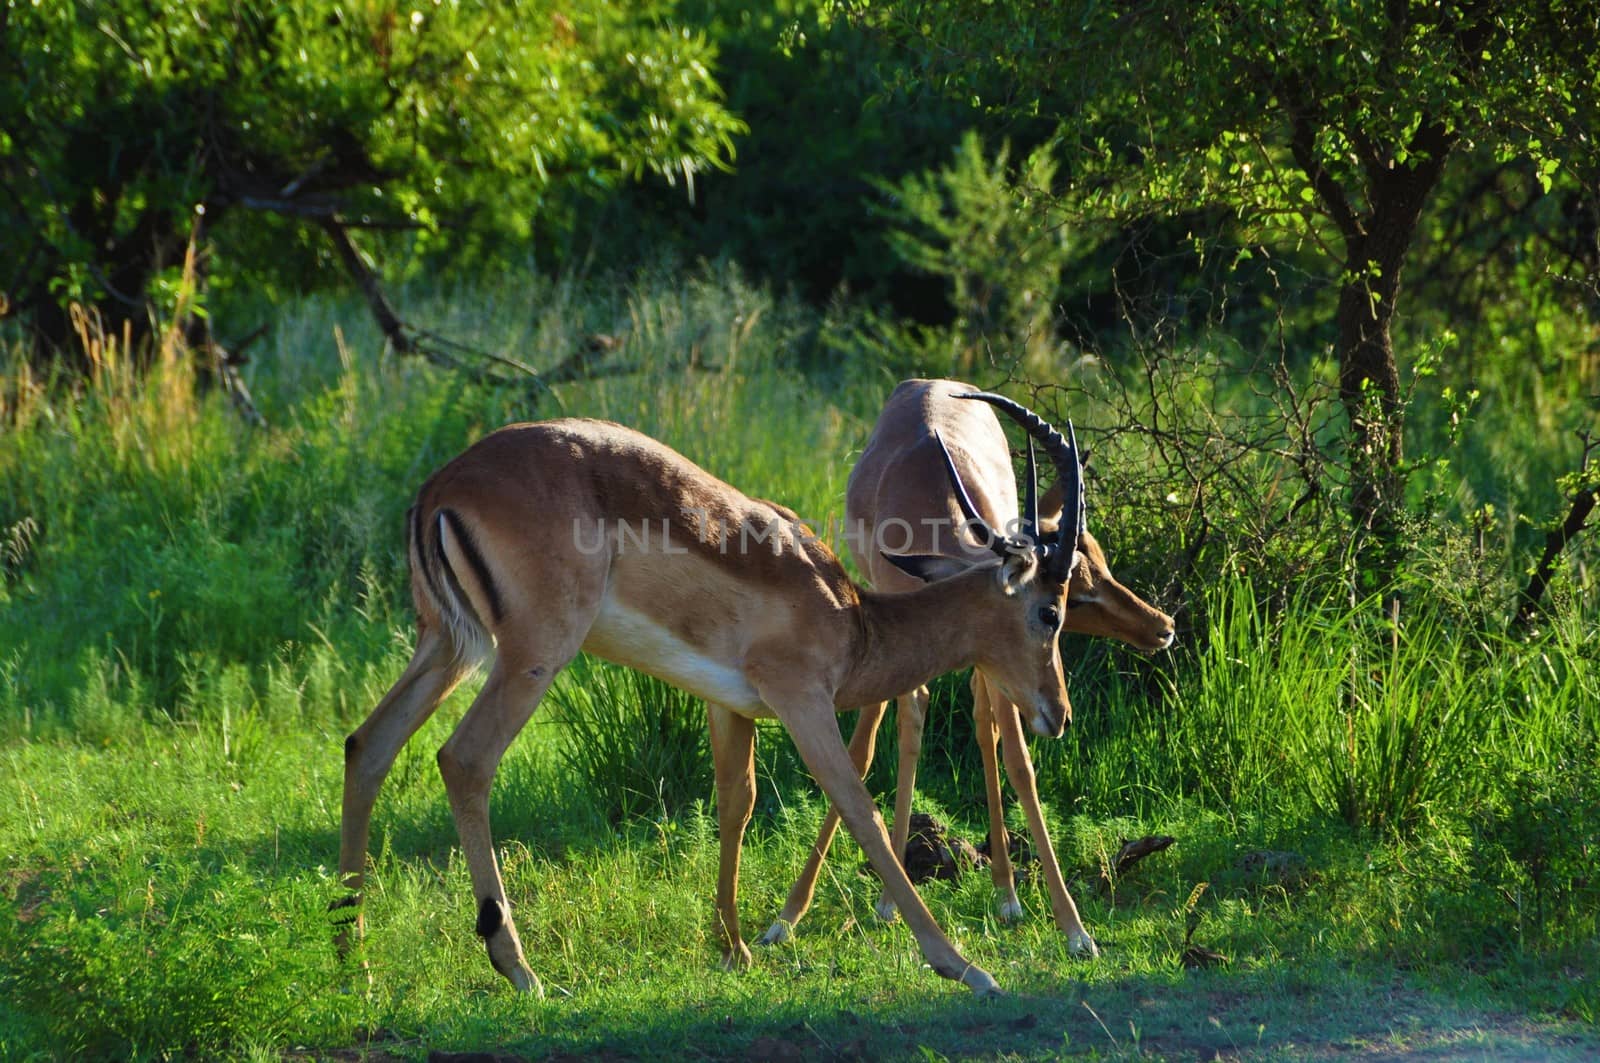 Two playing or fighting impalas in the savannah with trees in the background